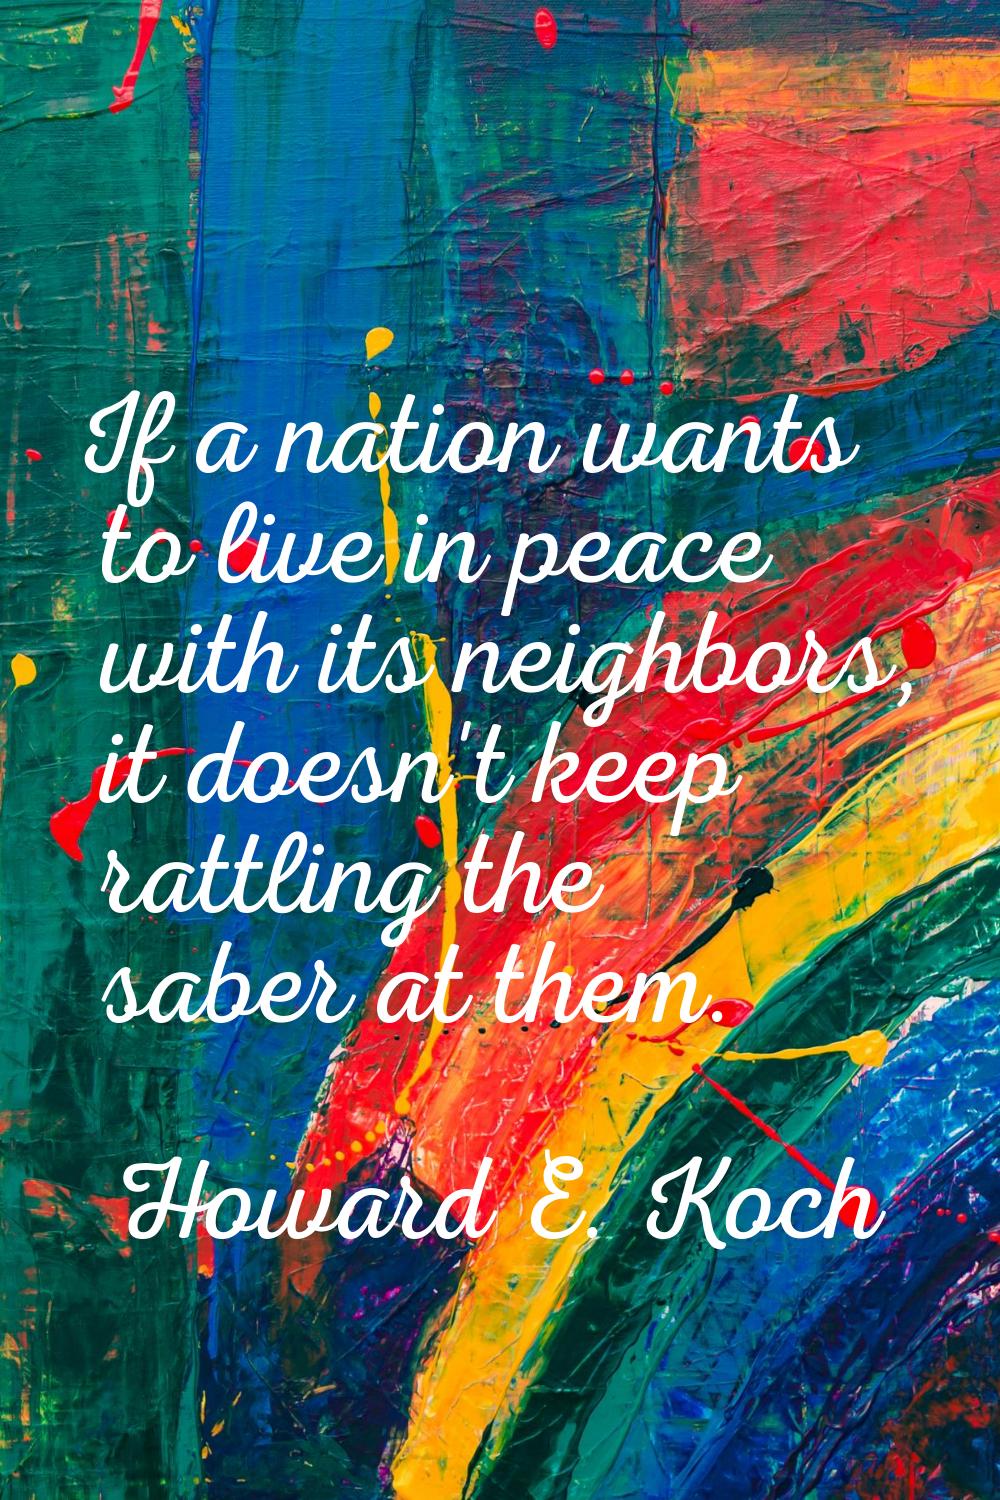 If a nation wants to live in peace with its neighbors, it doesn't keep rattling the saber at them.